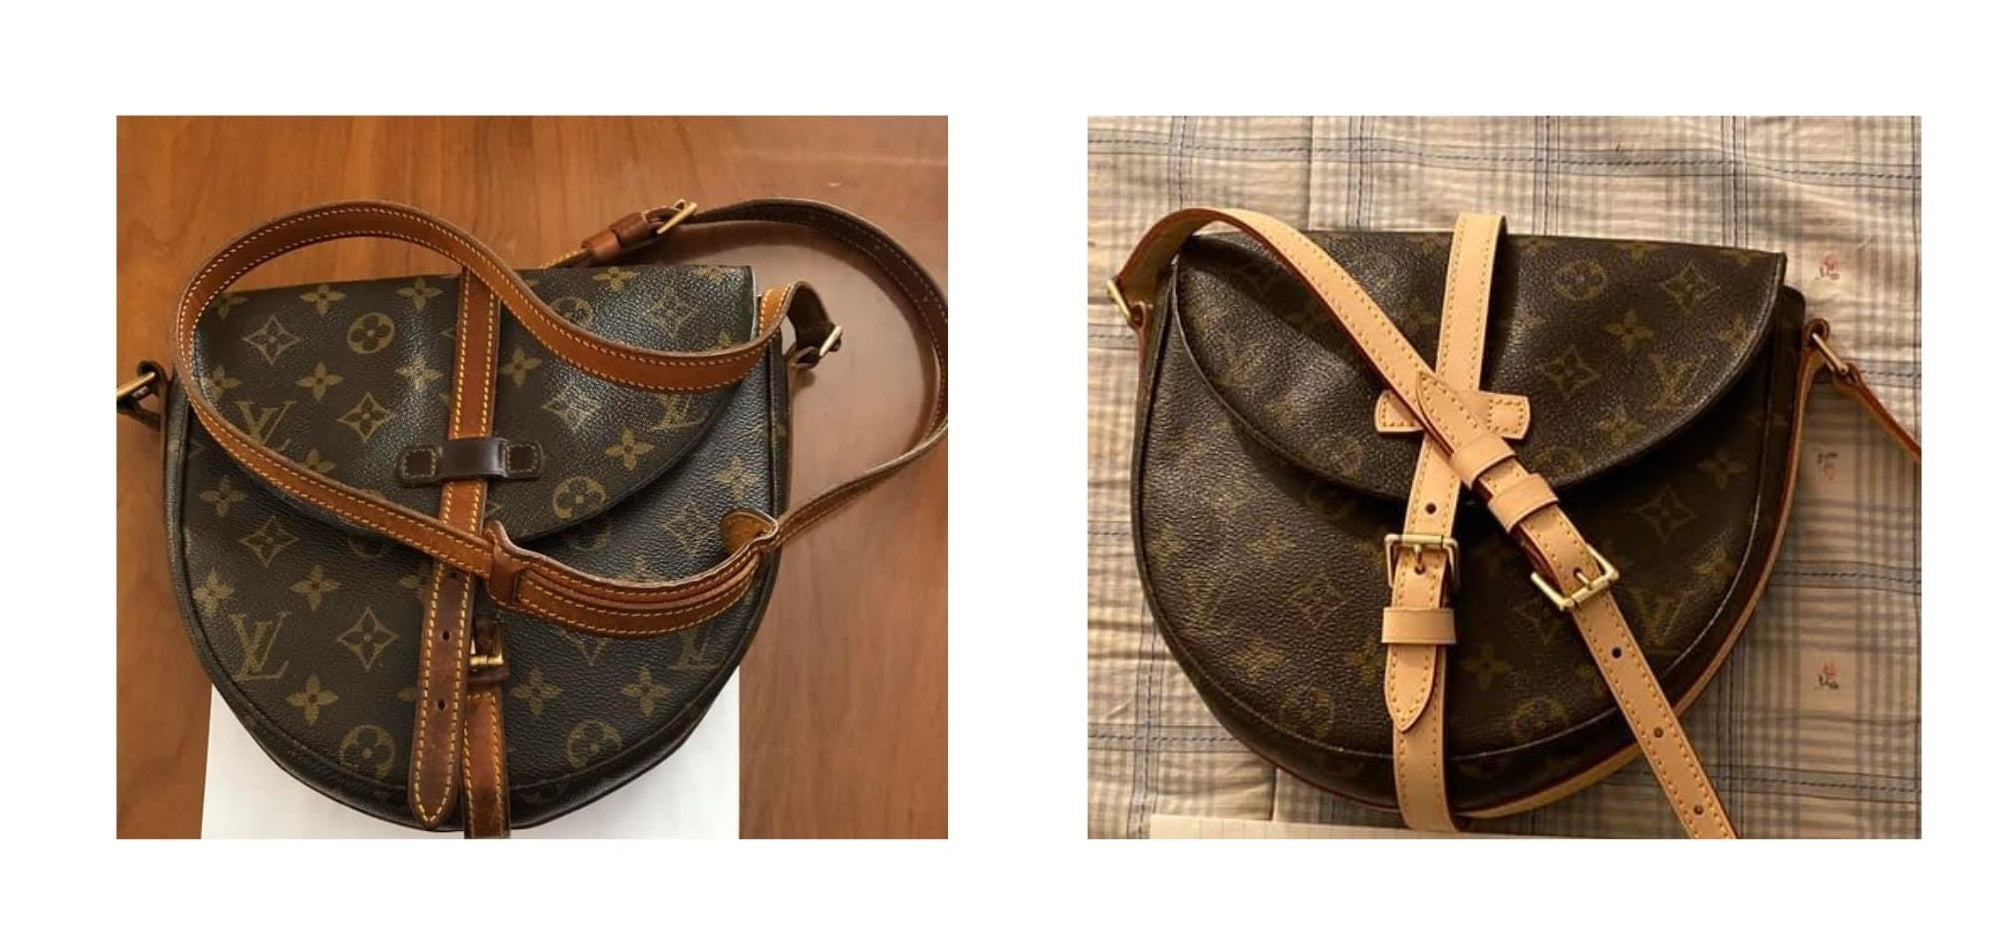 How to Clean Louis Vuitton Leather: Vachetta Leather & More